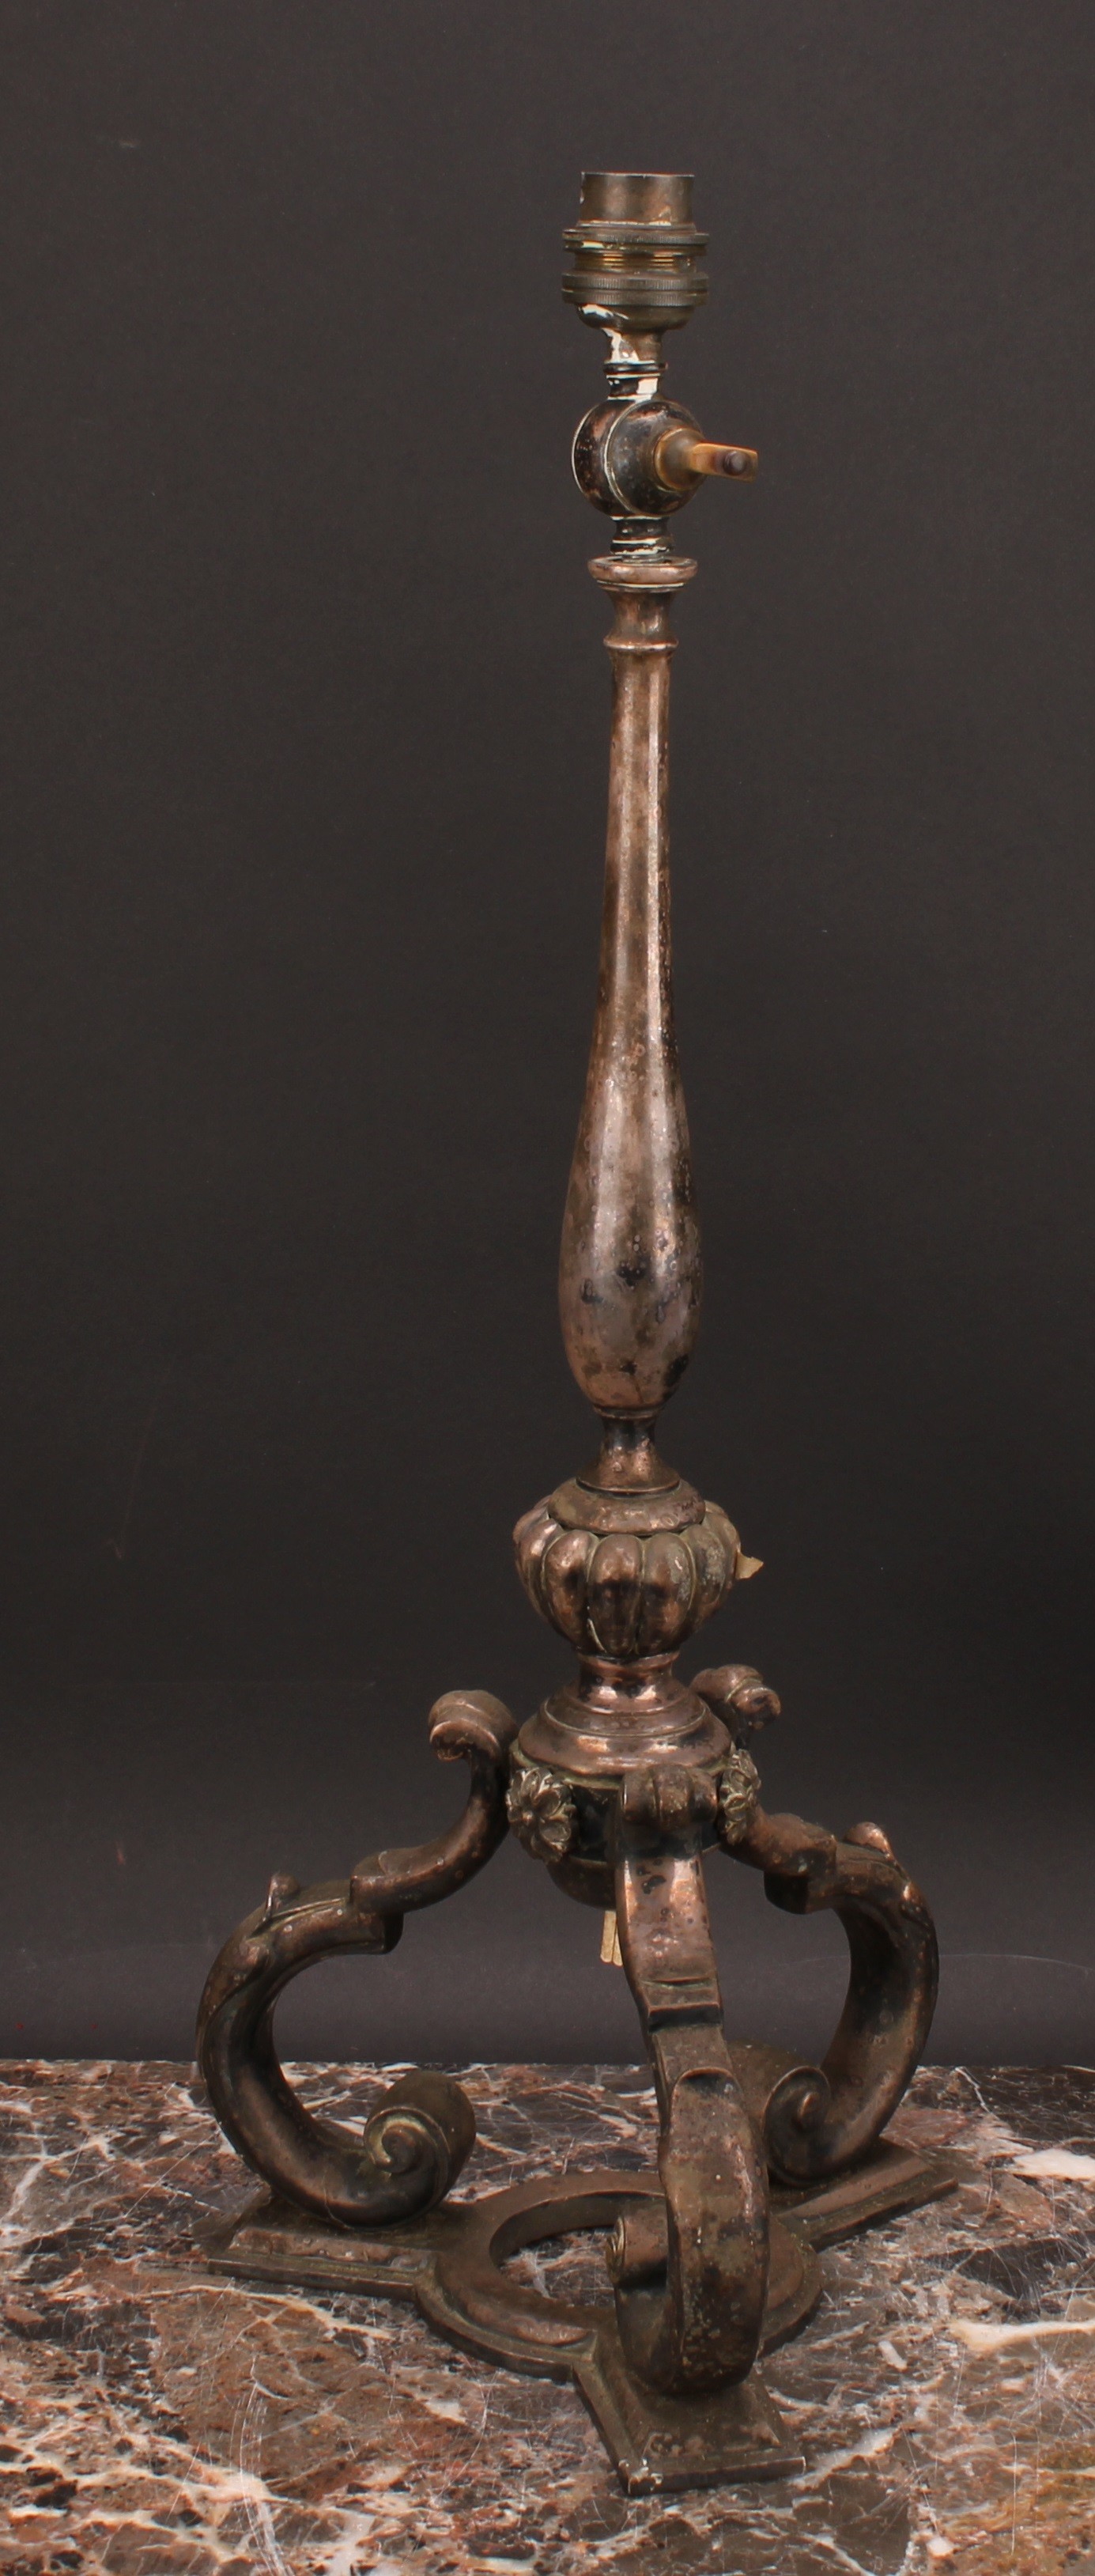 An early 20th century silver plated pullman lamp, designed for a railway carriage, articulated - Image 3 of 3